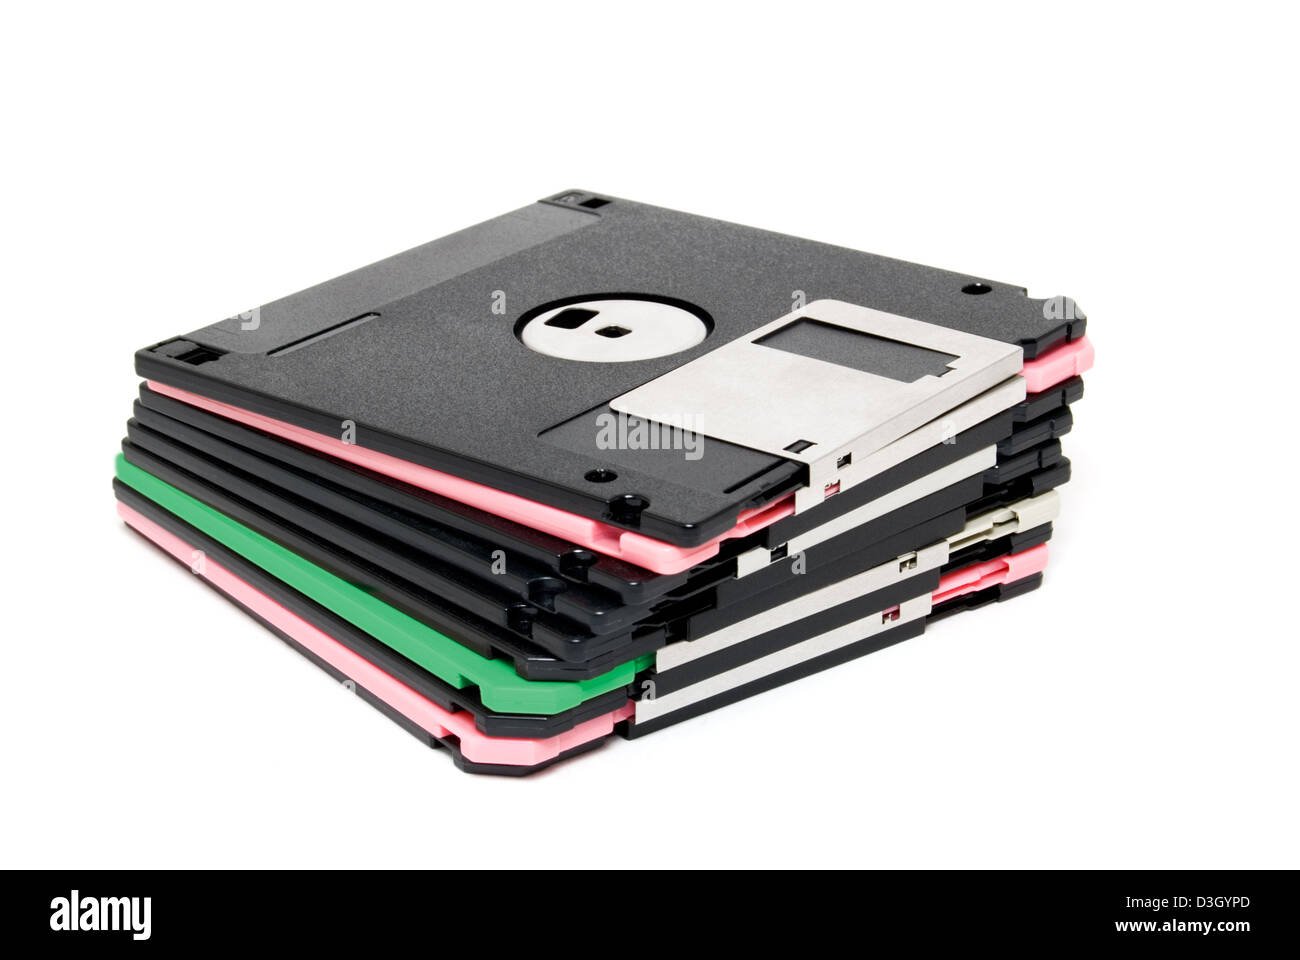 Diskettes photographed on a white background Stock Photo